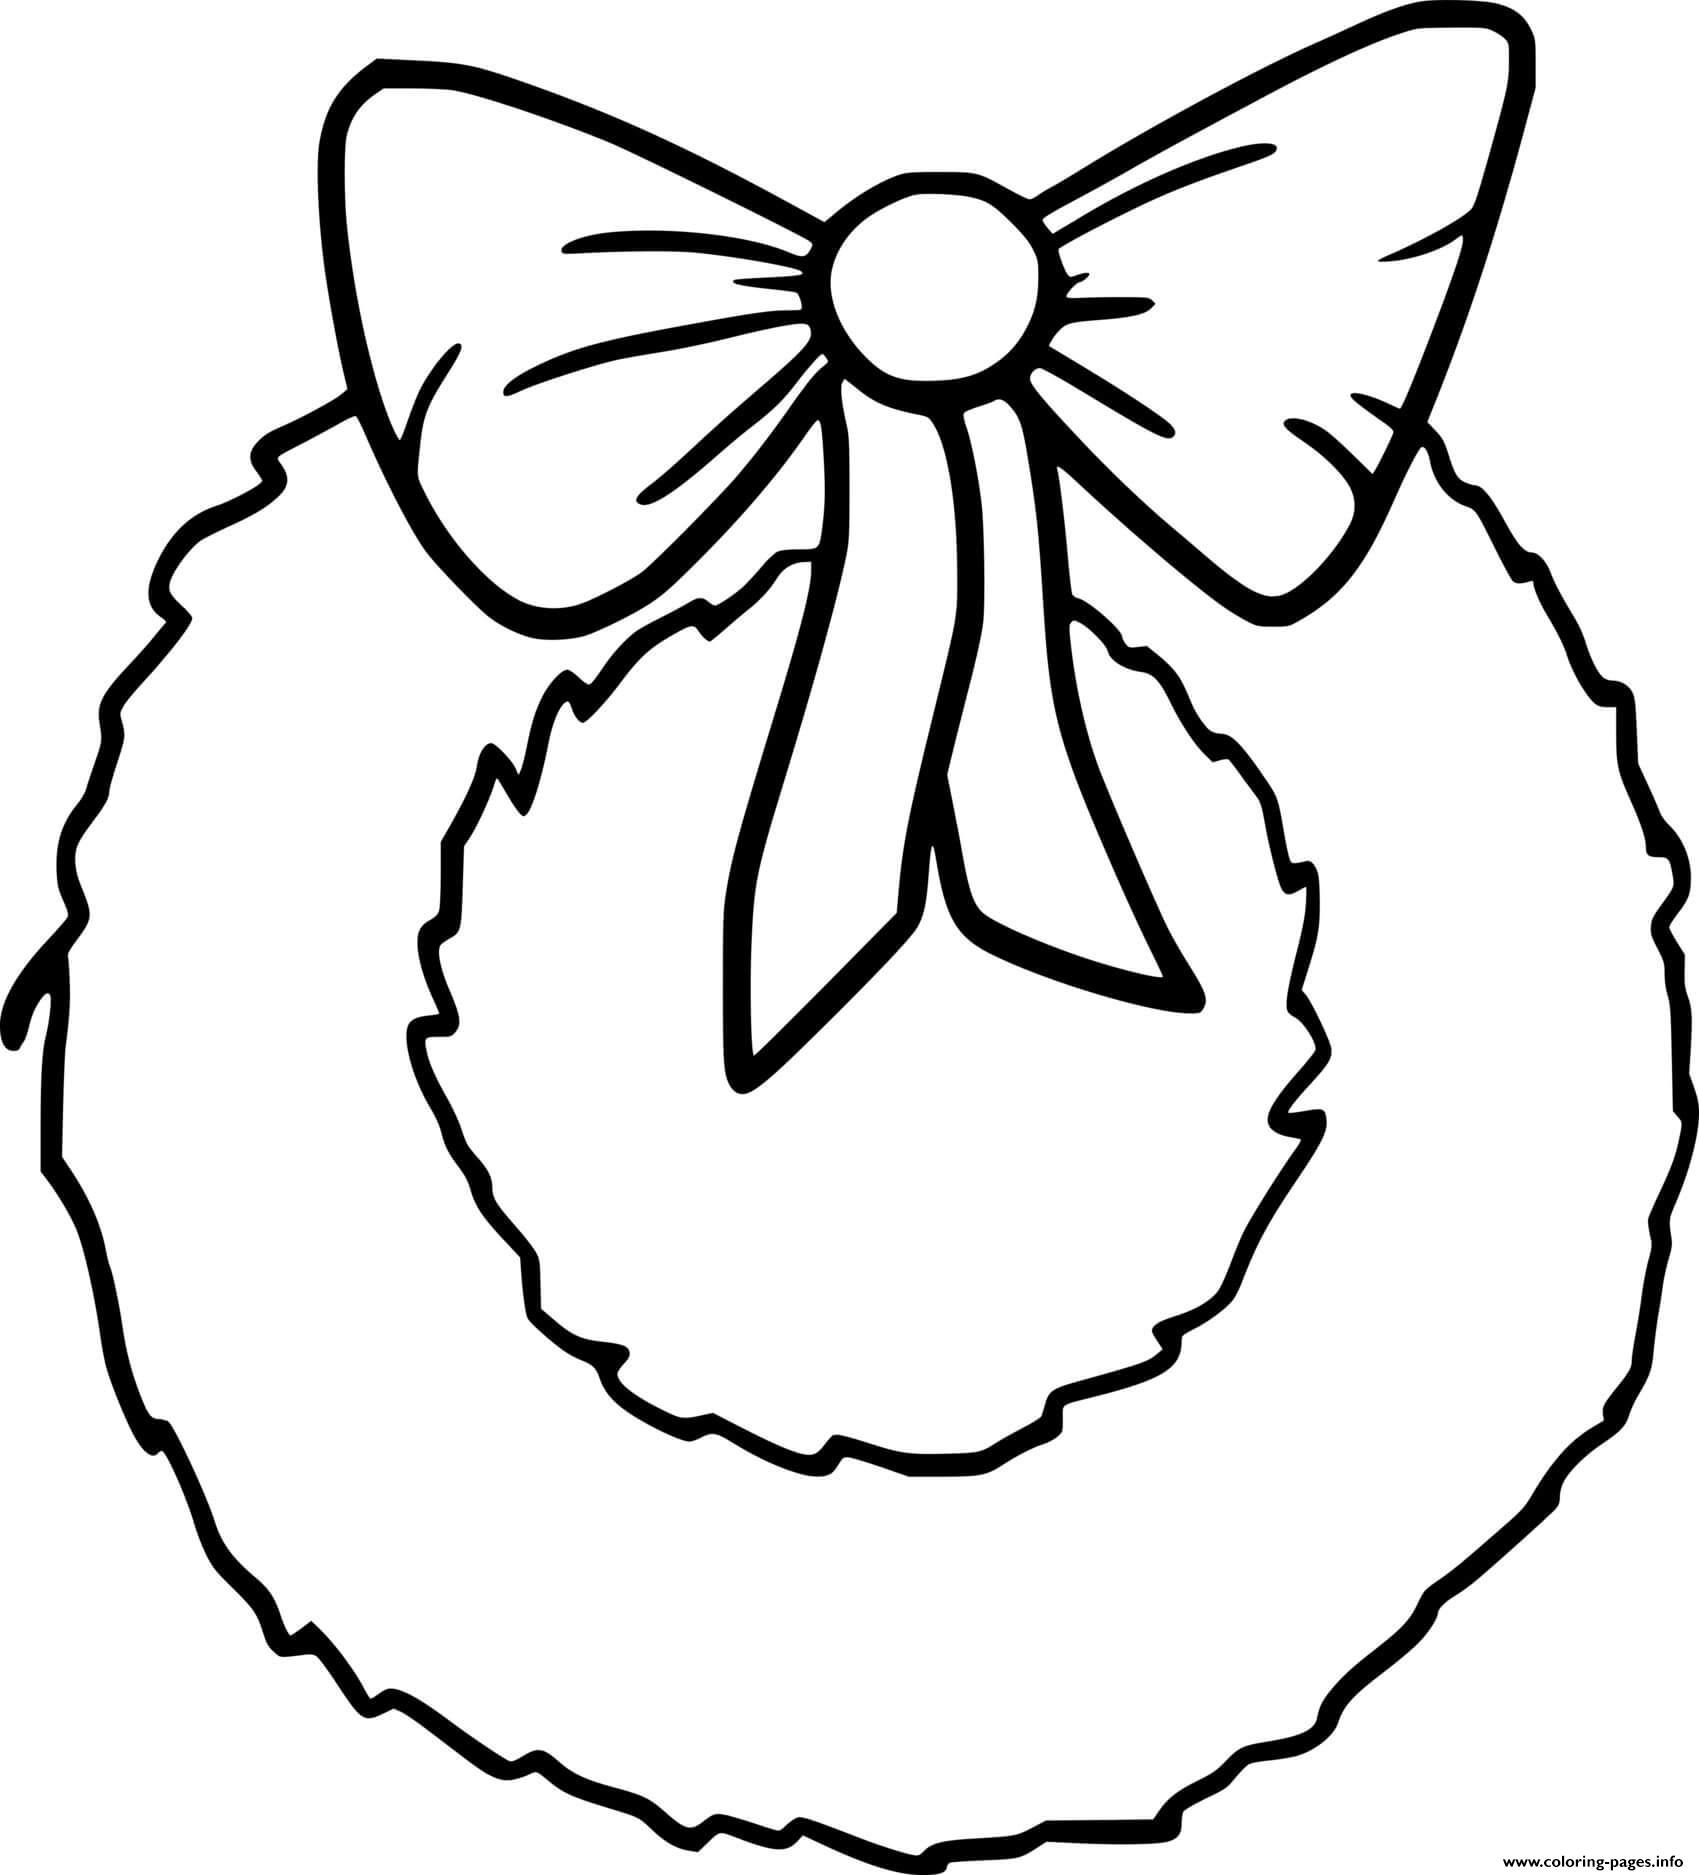 Easy Christmas Wreath coloring